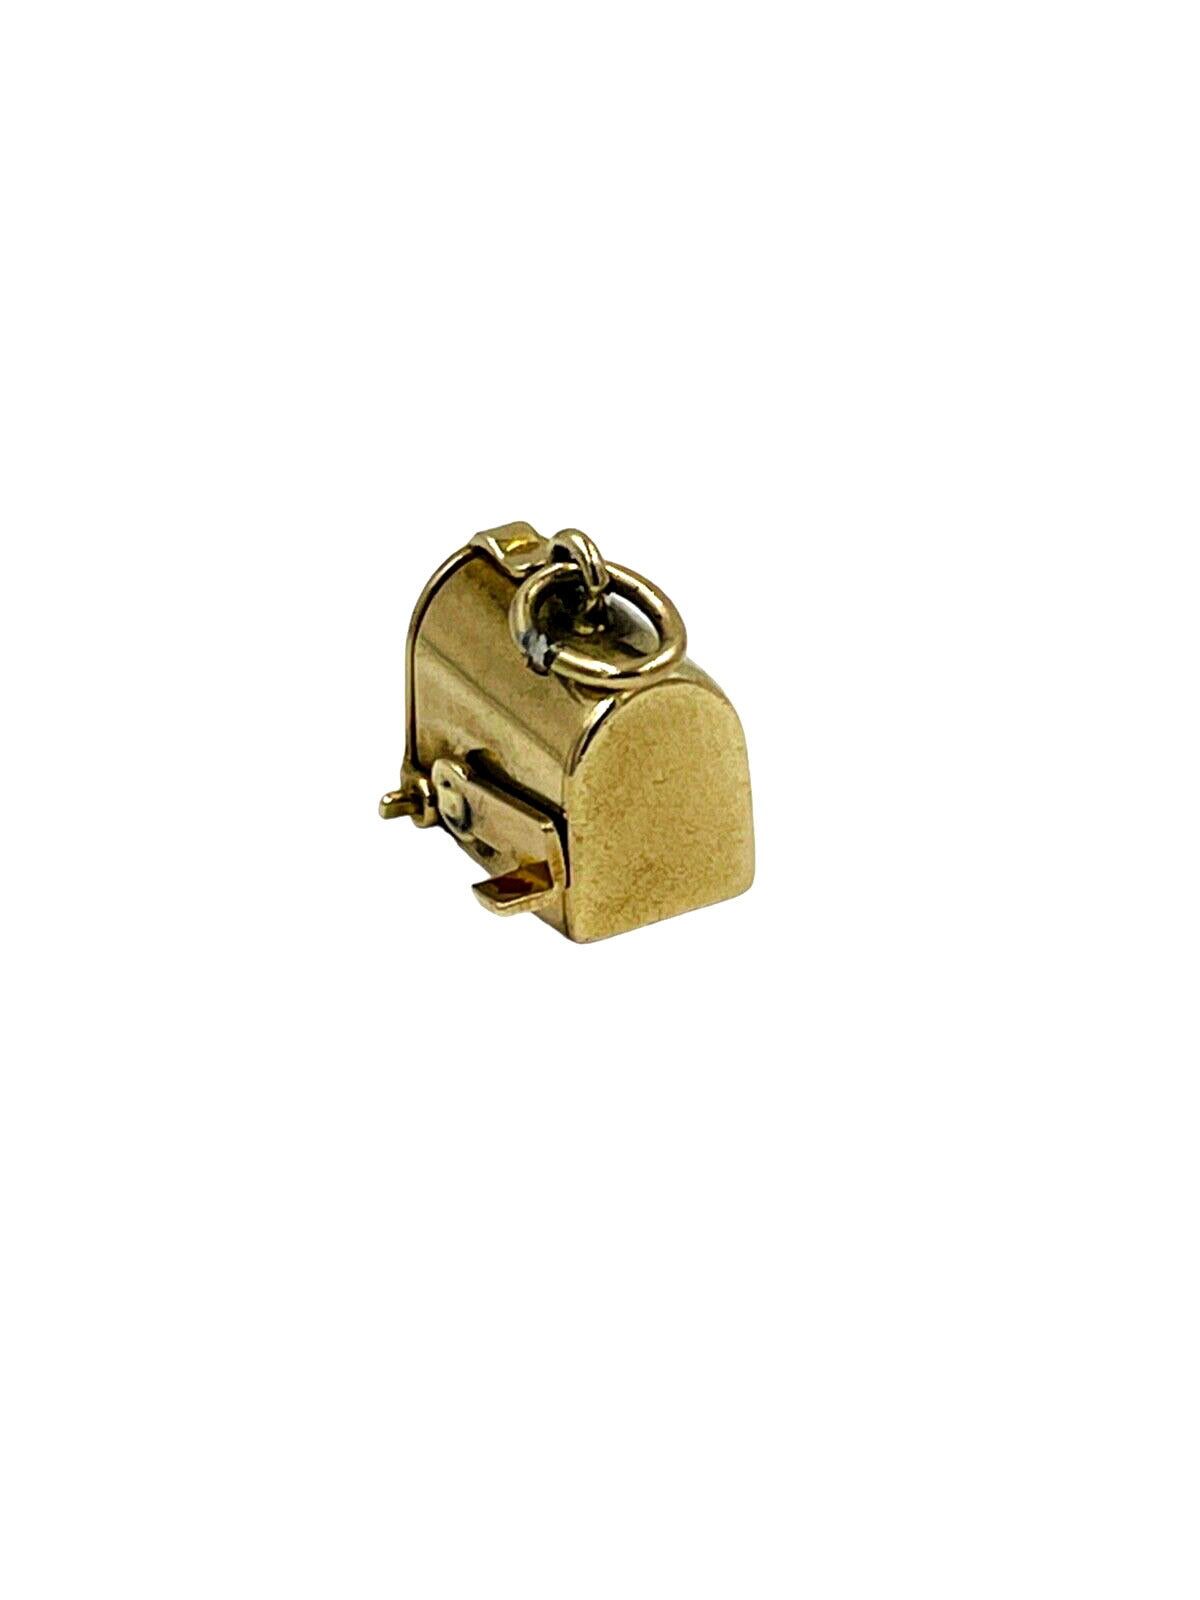 VINTAGE 10K YELLOW GOLD ARTICULATED 3D HEART MAILBOX CHARM PENDANT